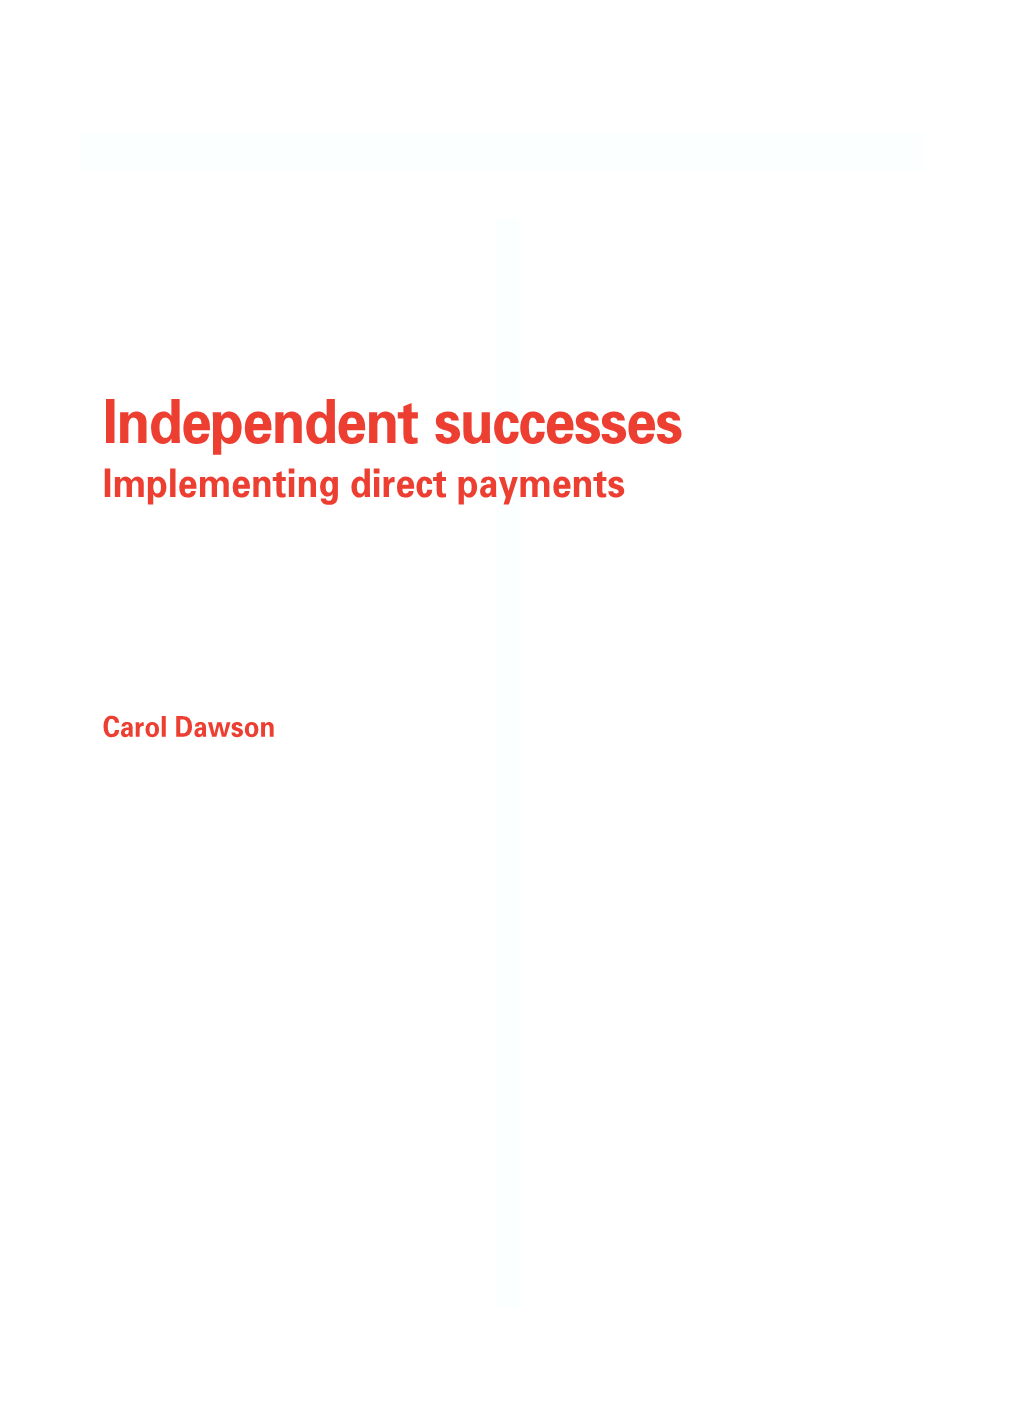 Independent Successes: Implementing Direct Payments